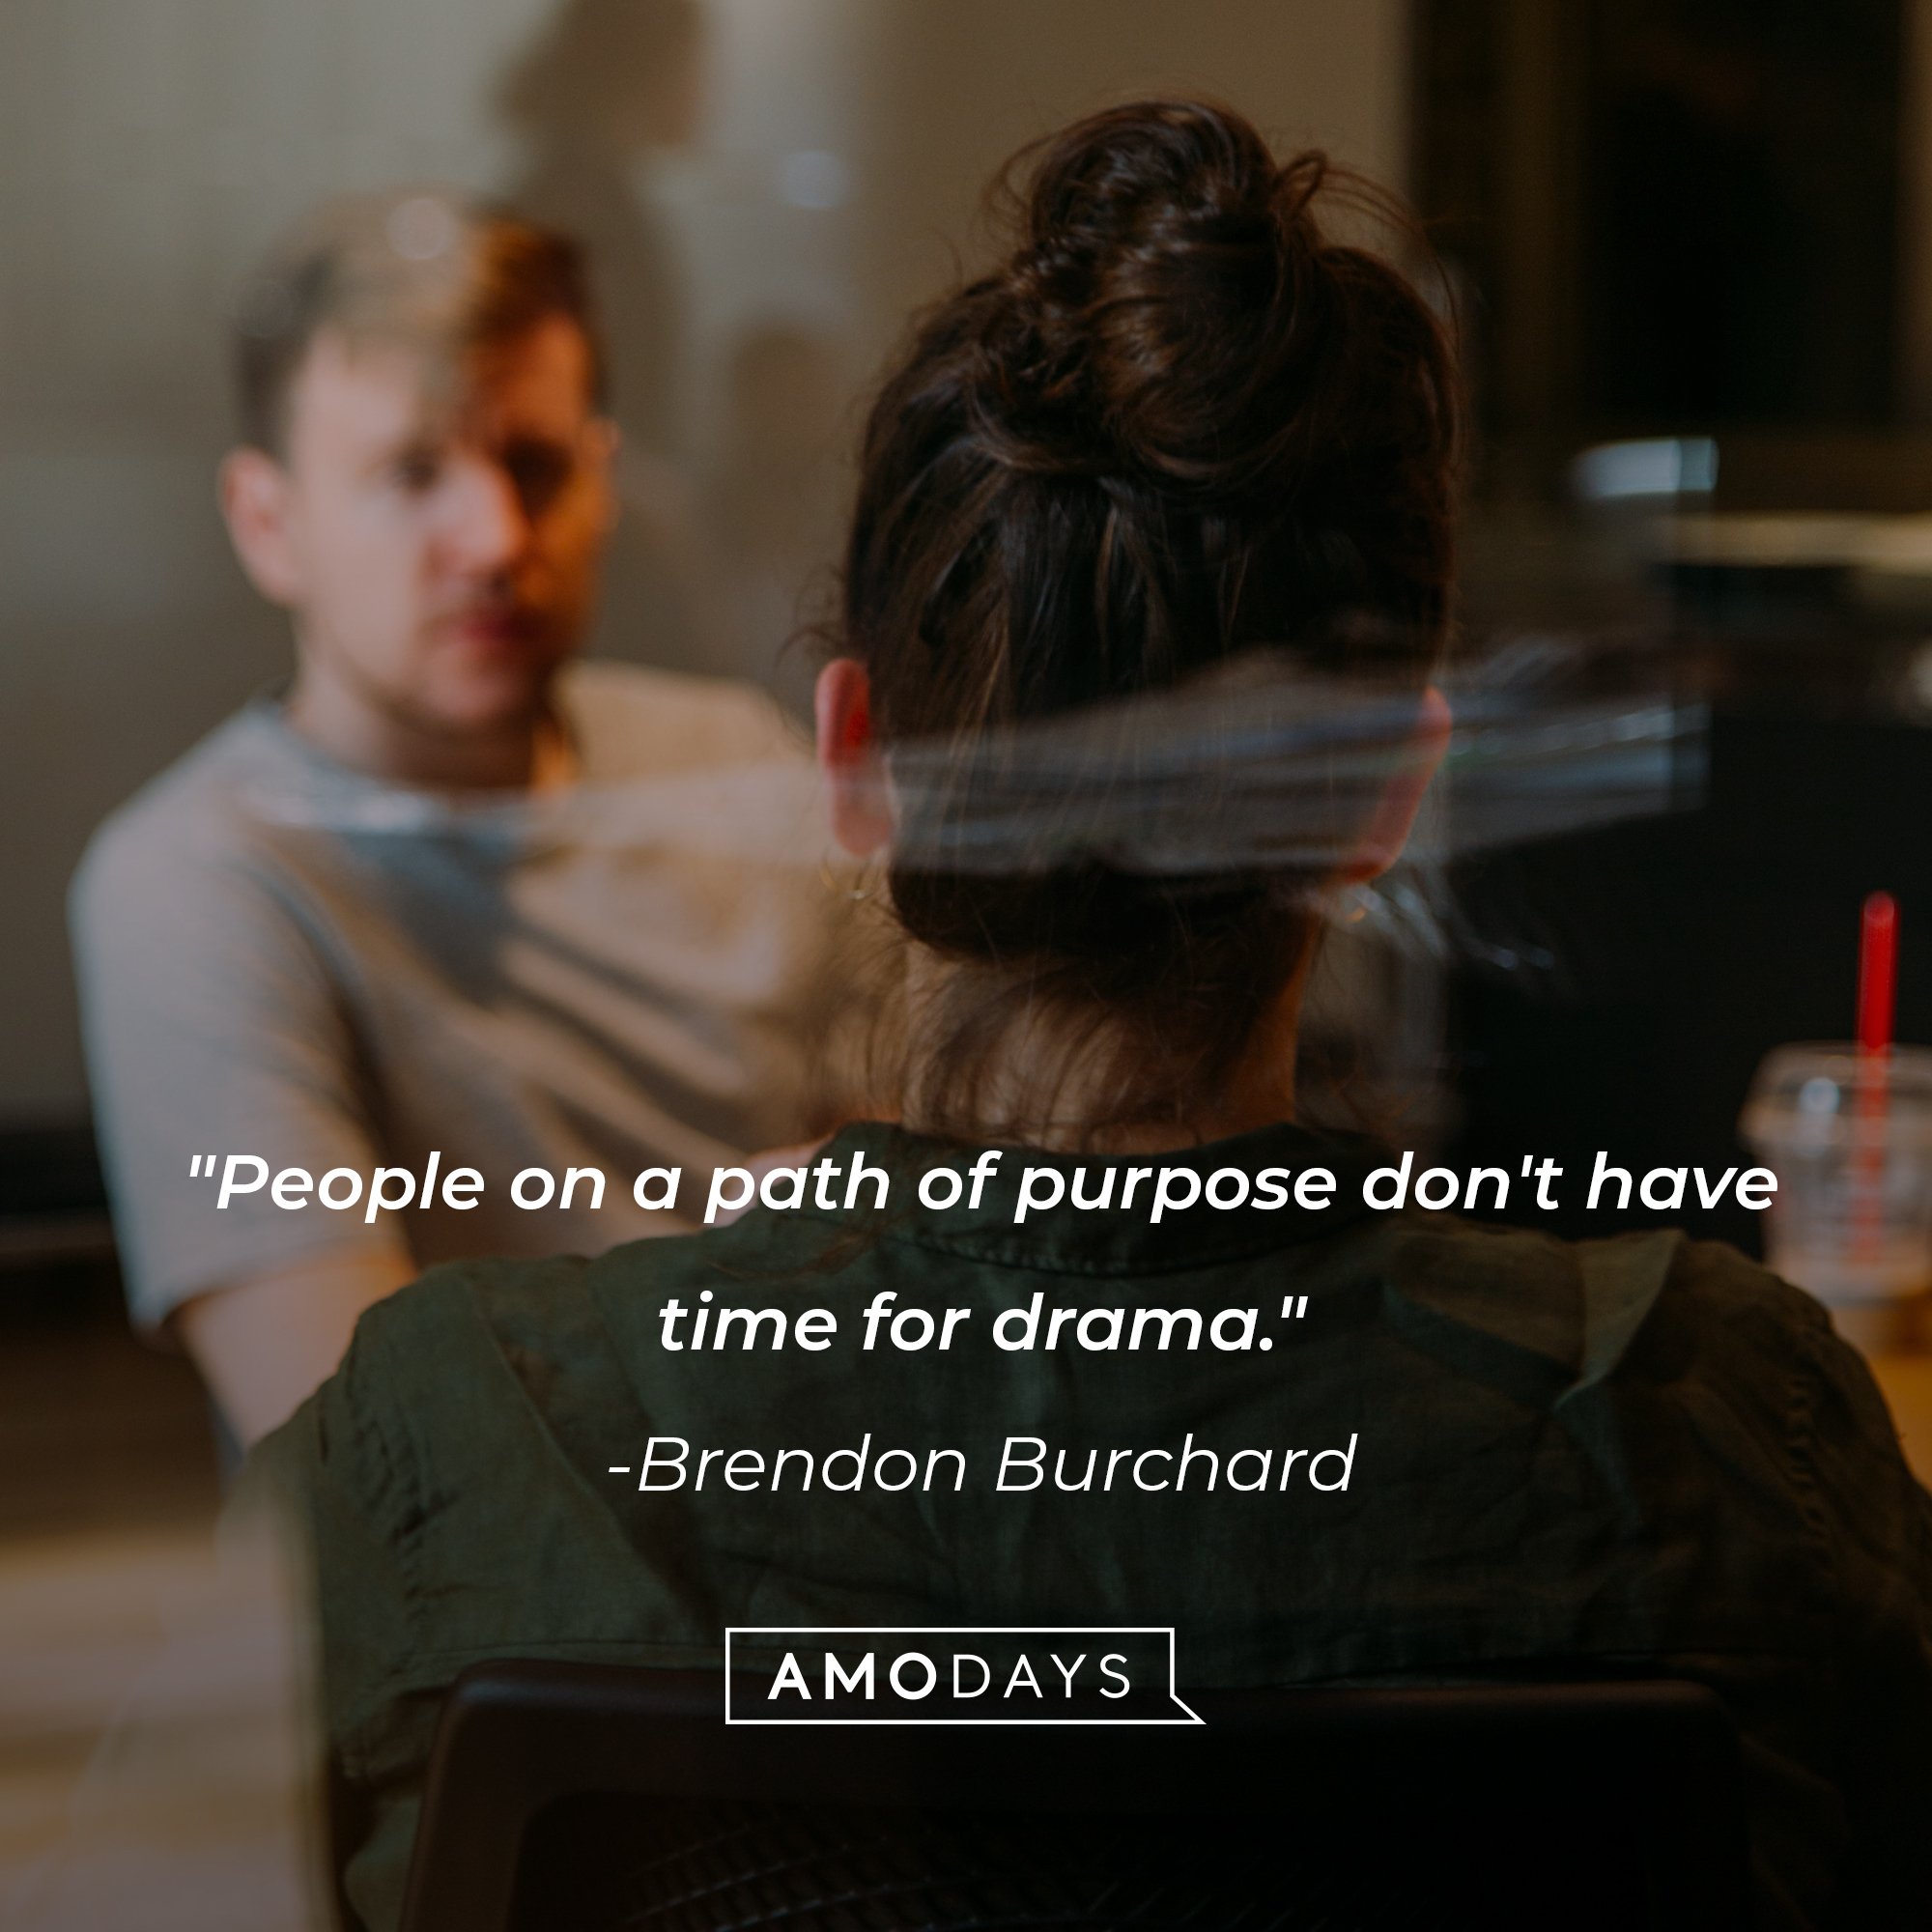 Brendon Burchard’s quote: "People on a path of purpose don't have time for drama." | Image: AmoDays